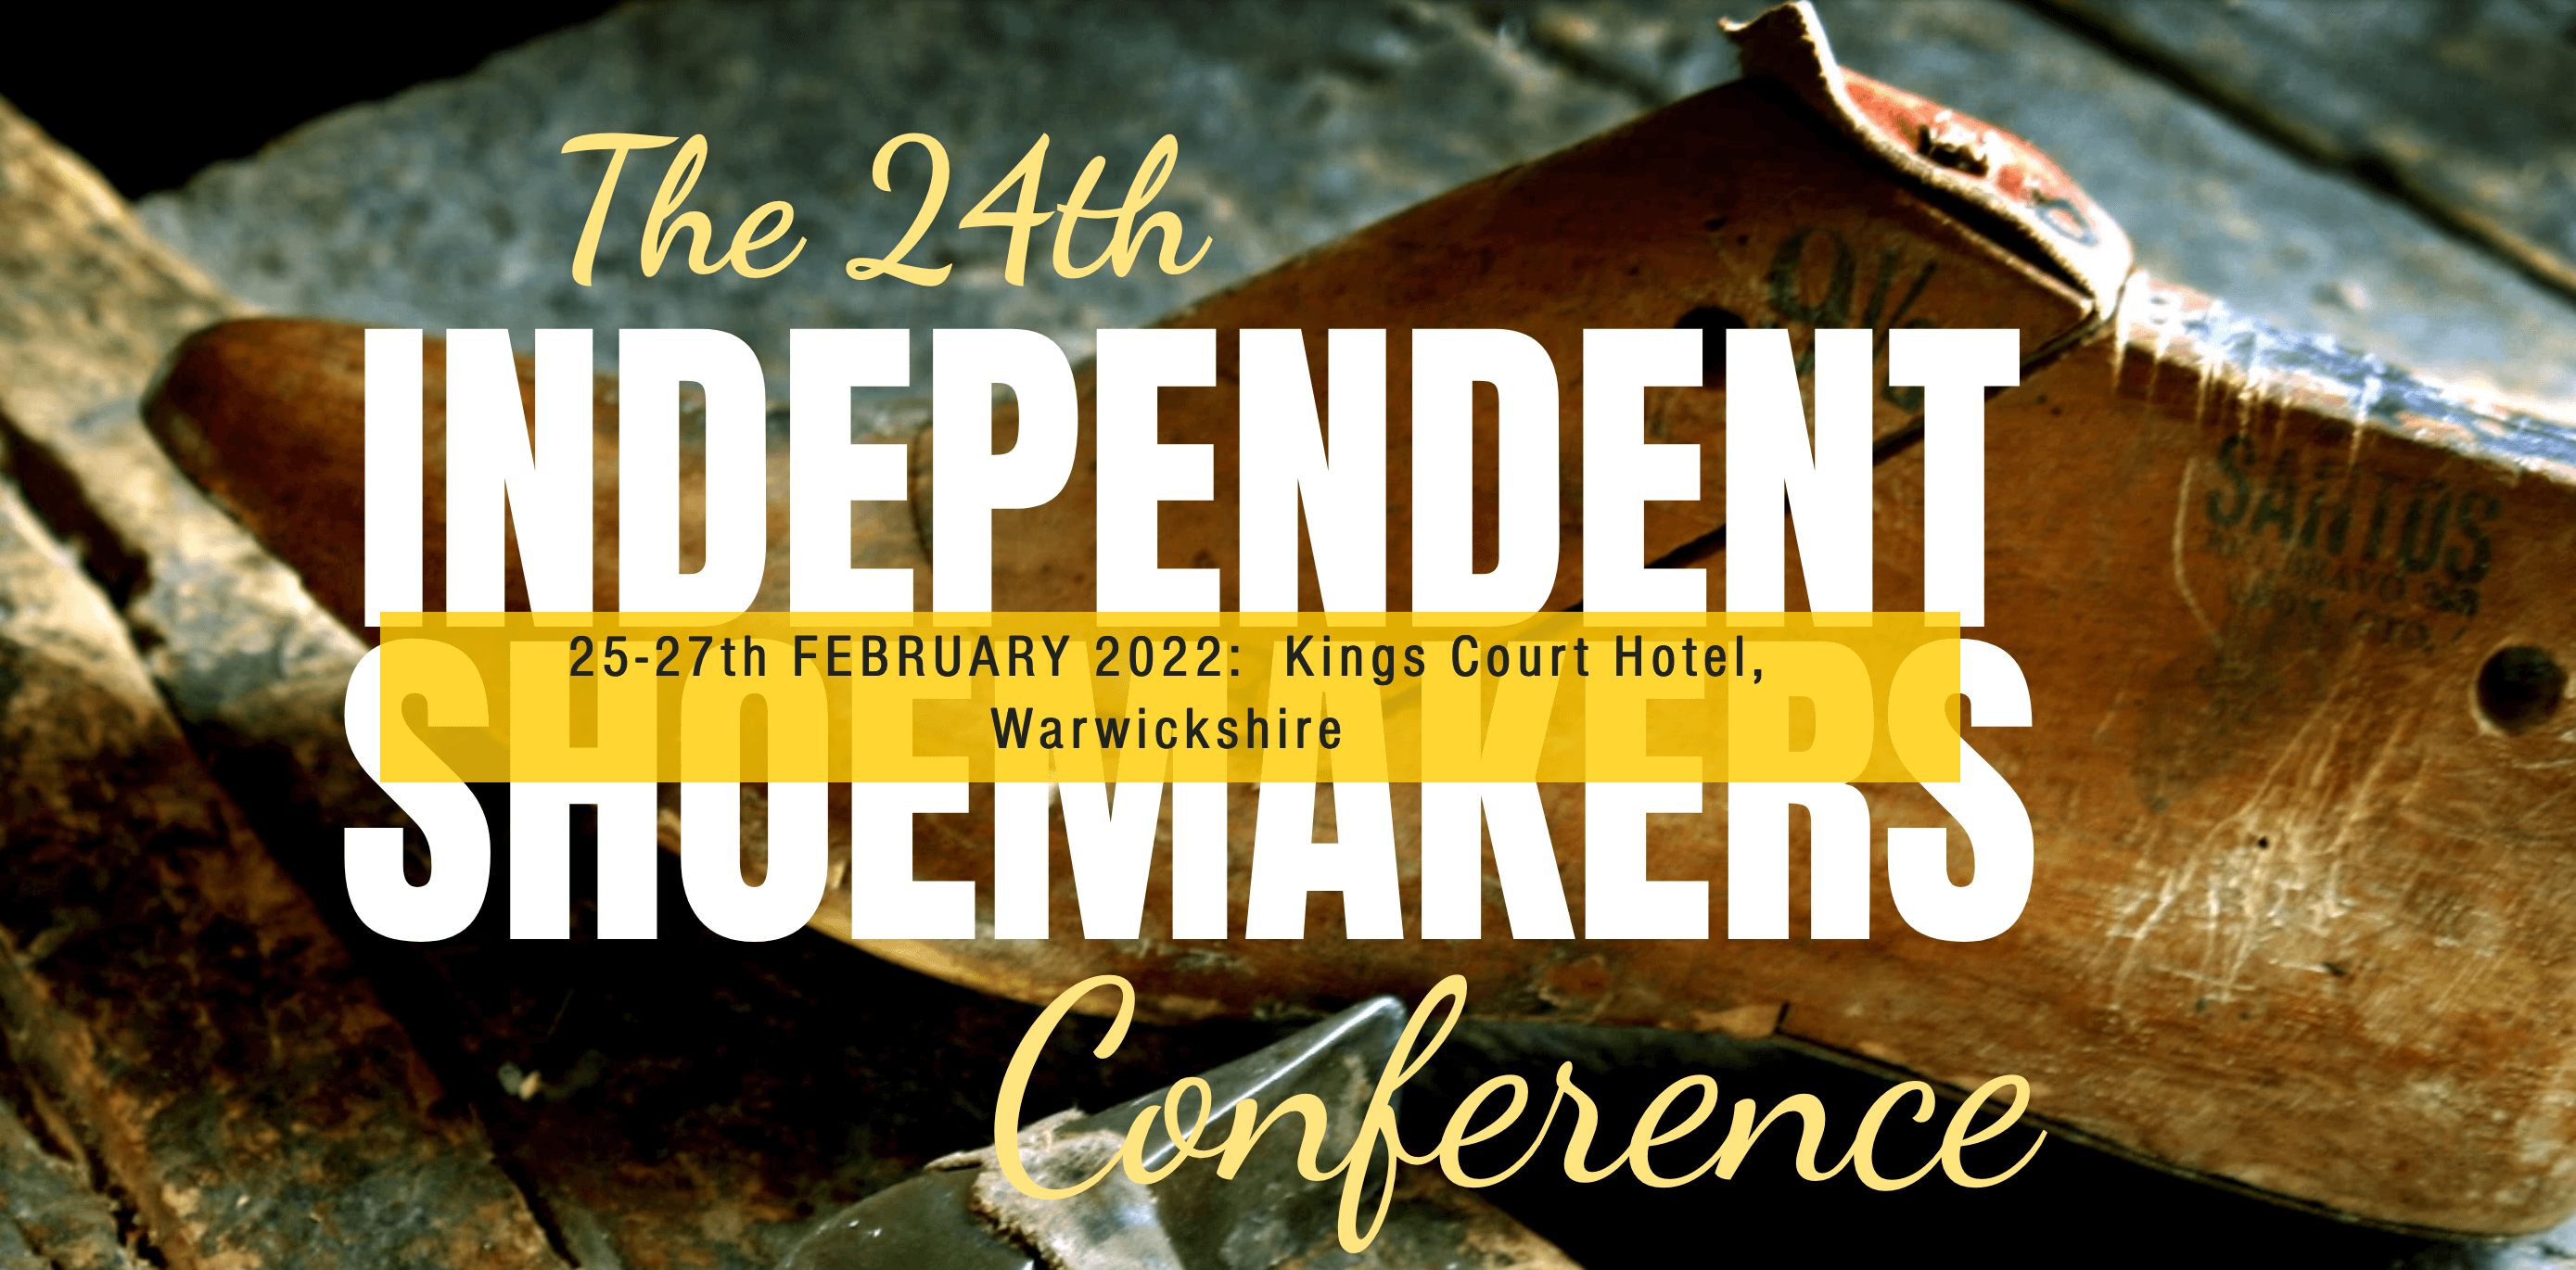 24th annual independent shoemakers conference taking place in Alcester, Warwickshire from the 25th – 27th Feb